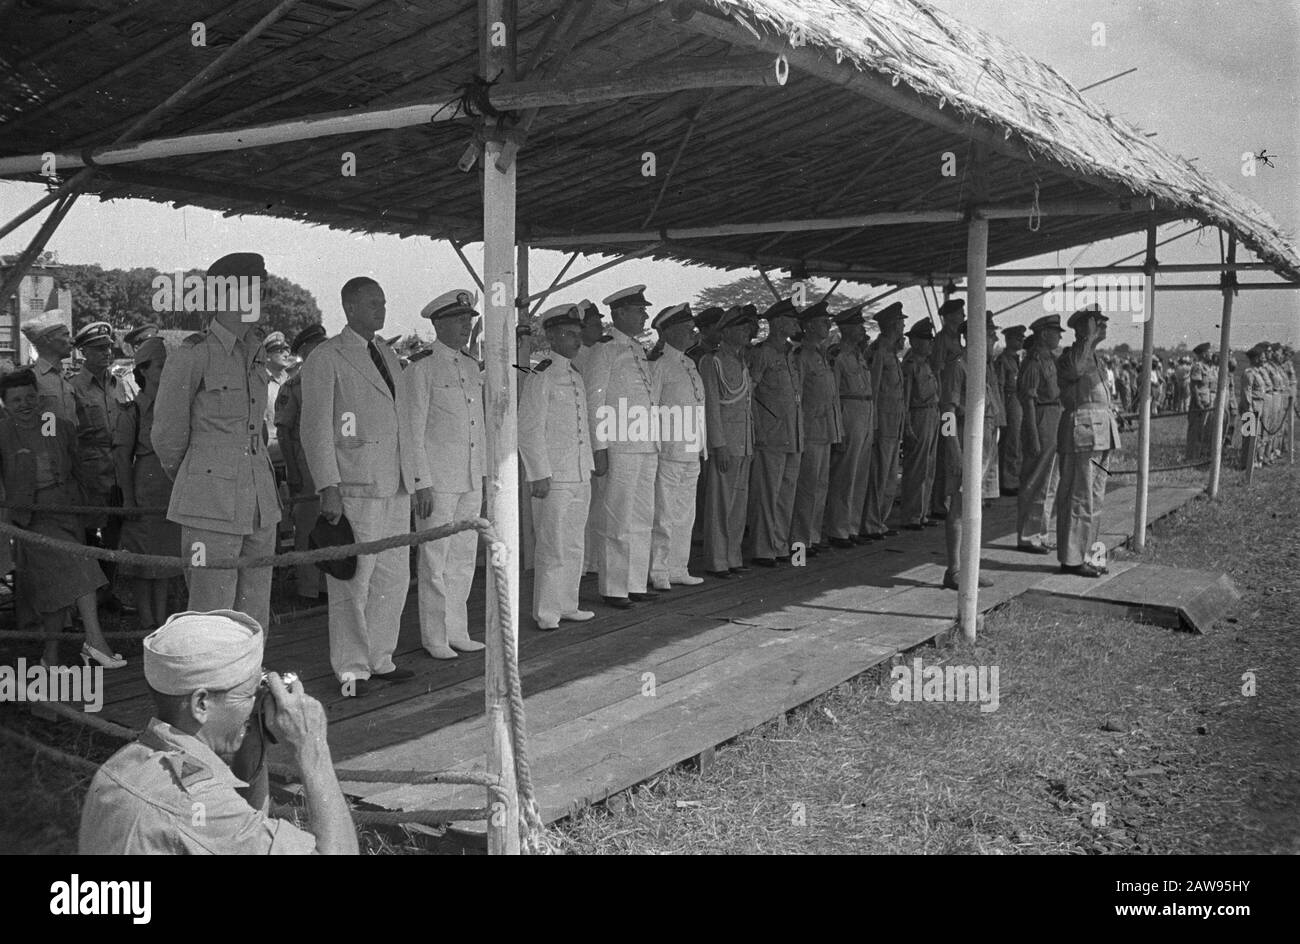 Transfer of command of the Military Air Force Colonel P.J. the Broeckert Colonel CW van der Eem at the airport Tjilitjan Attendees officers and other armed services. General Spoor salutes Date: April 17, 1948 Location: Indonesia Dutch East Indies Stock Photo